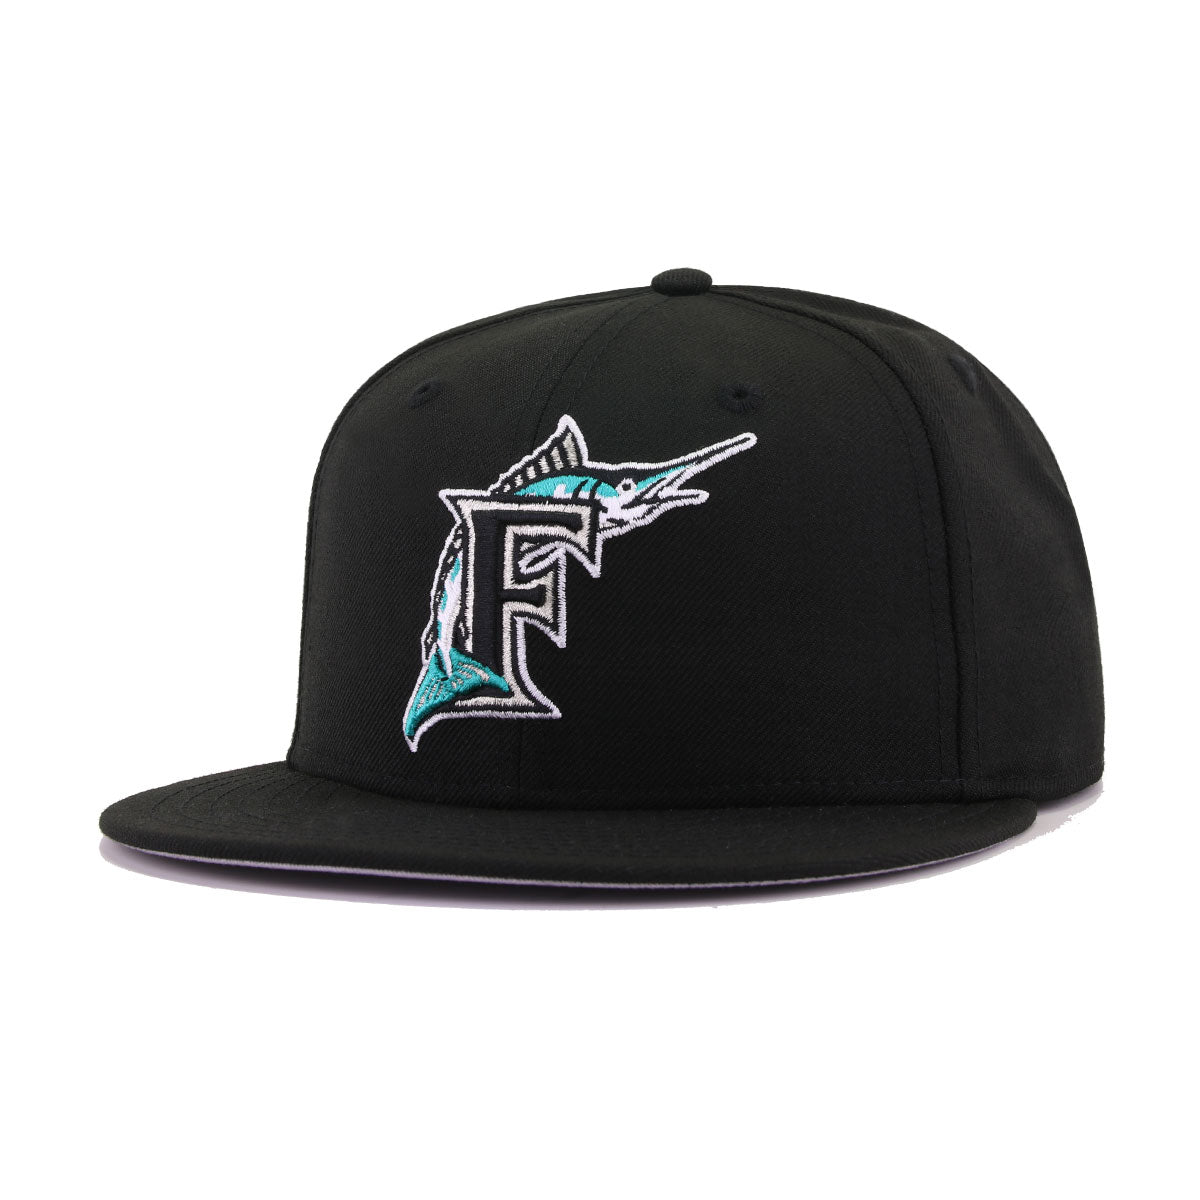 Men's New Era Teal Florida Marlins Cooperstown Collection Turn Back The Clock 59FIFTY Fitted Hat